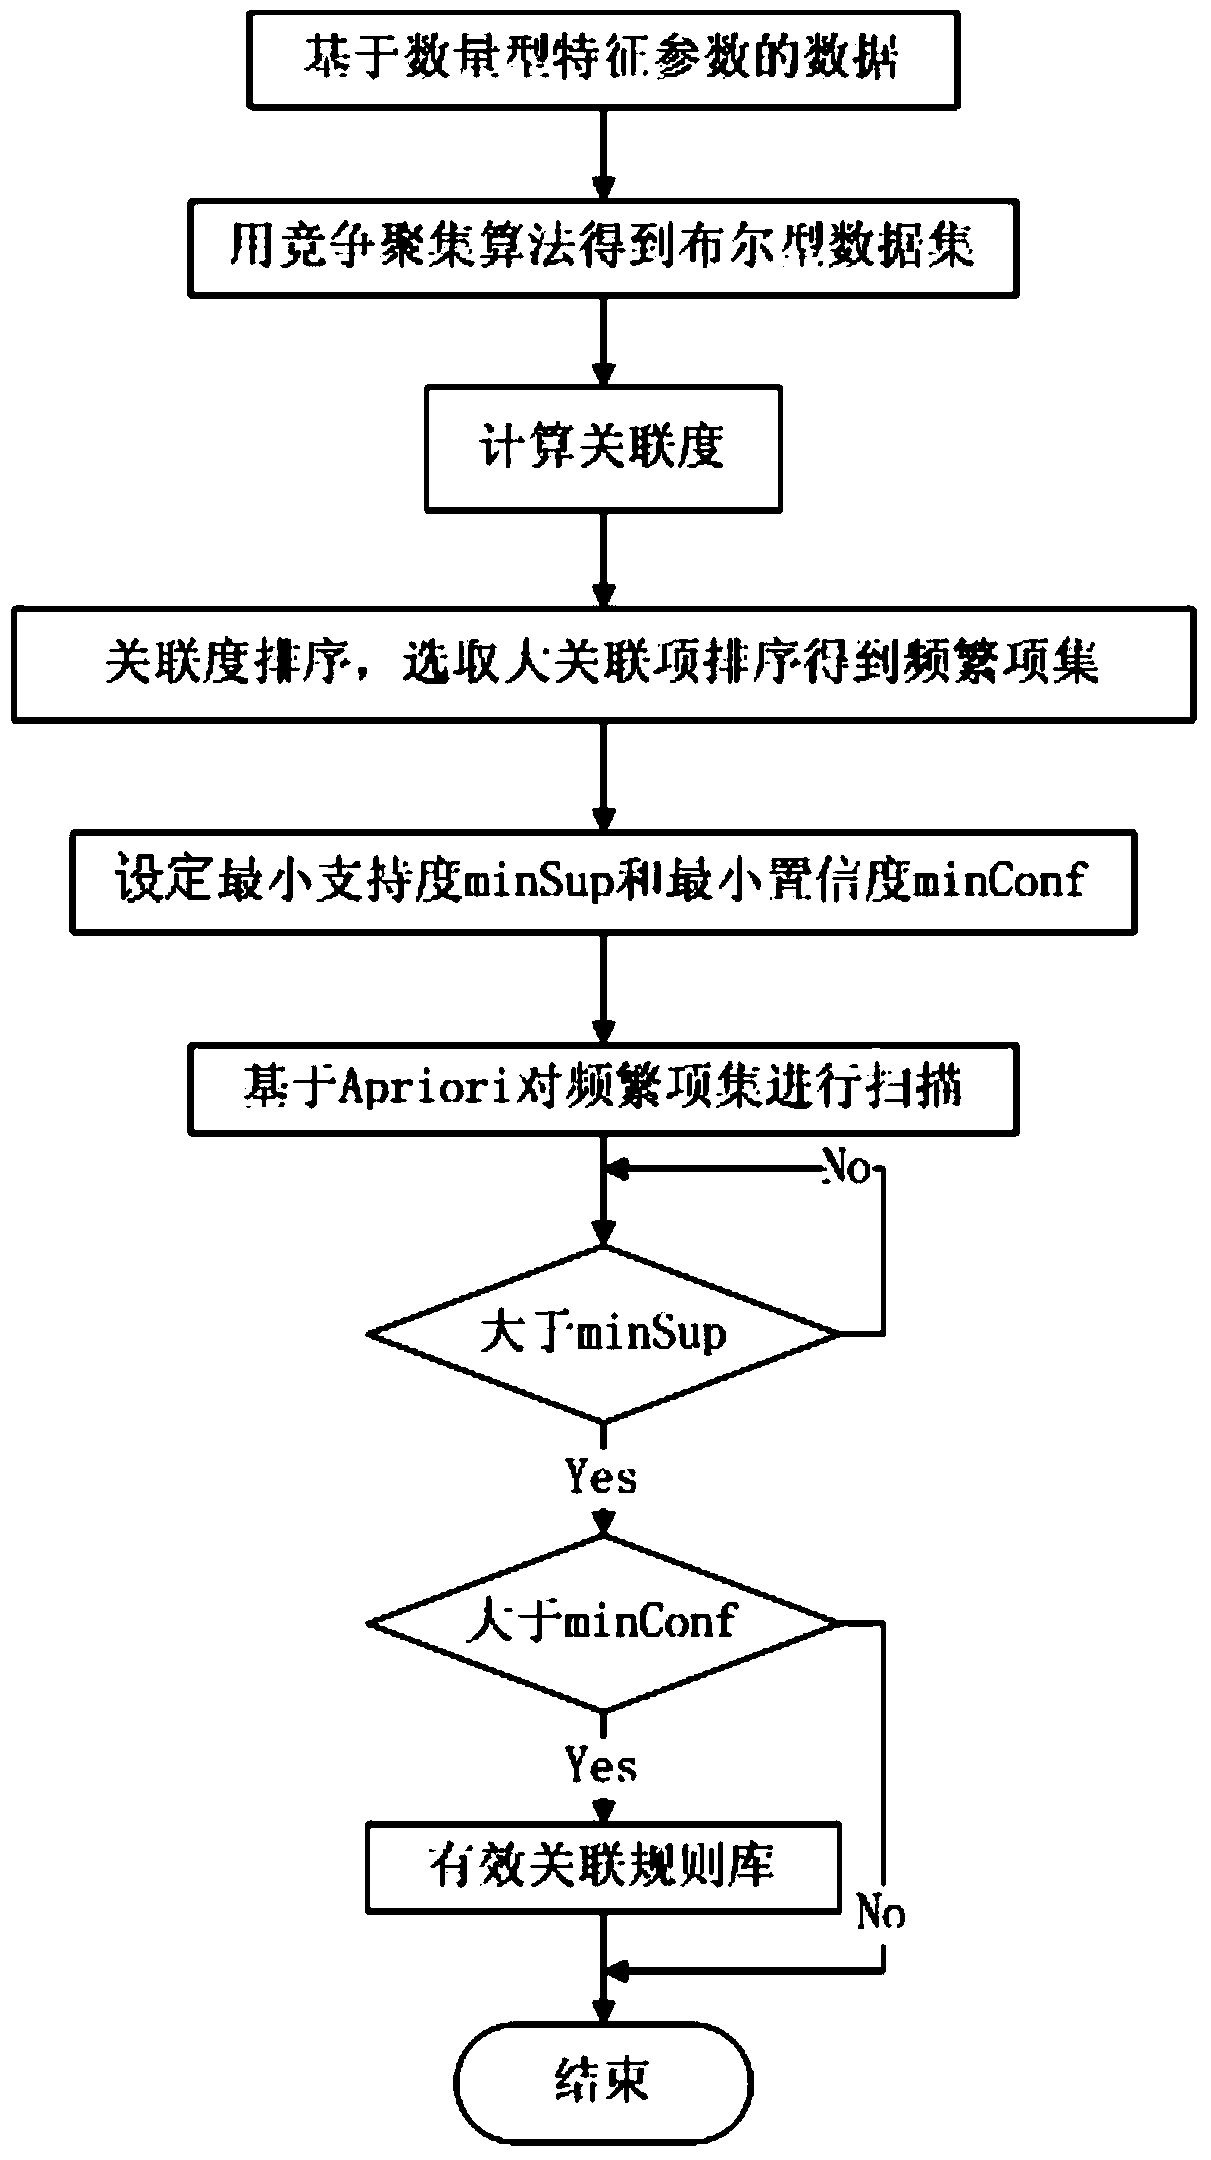 Partial discharge diagnosis method based on data mining